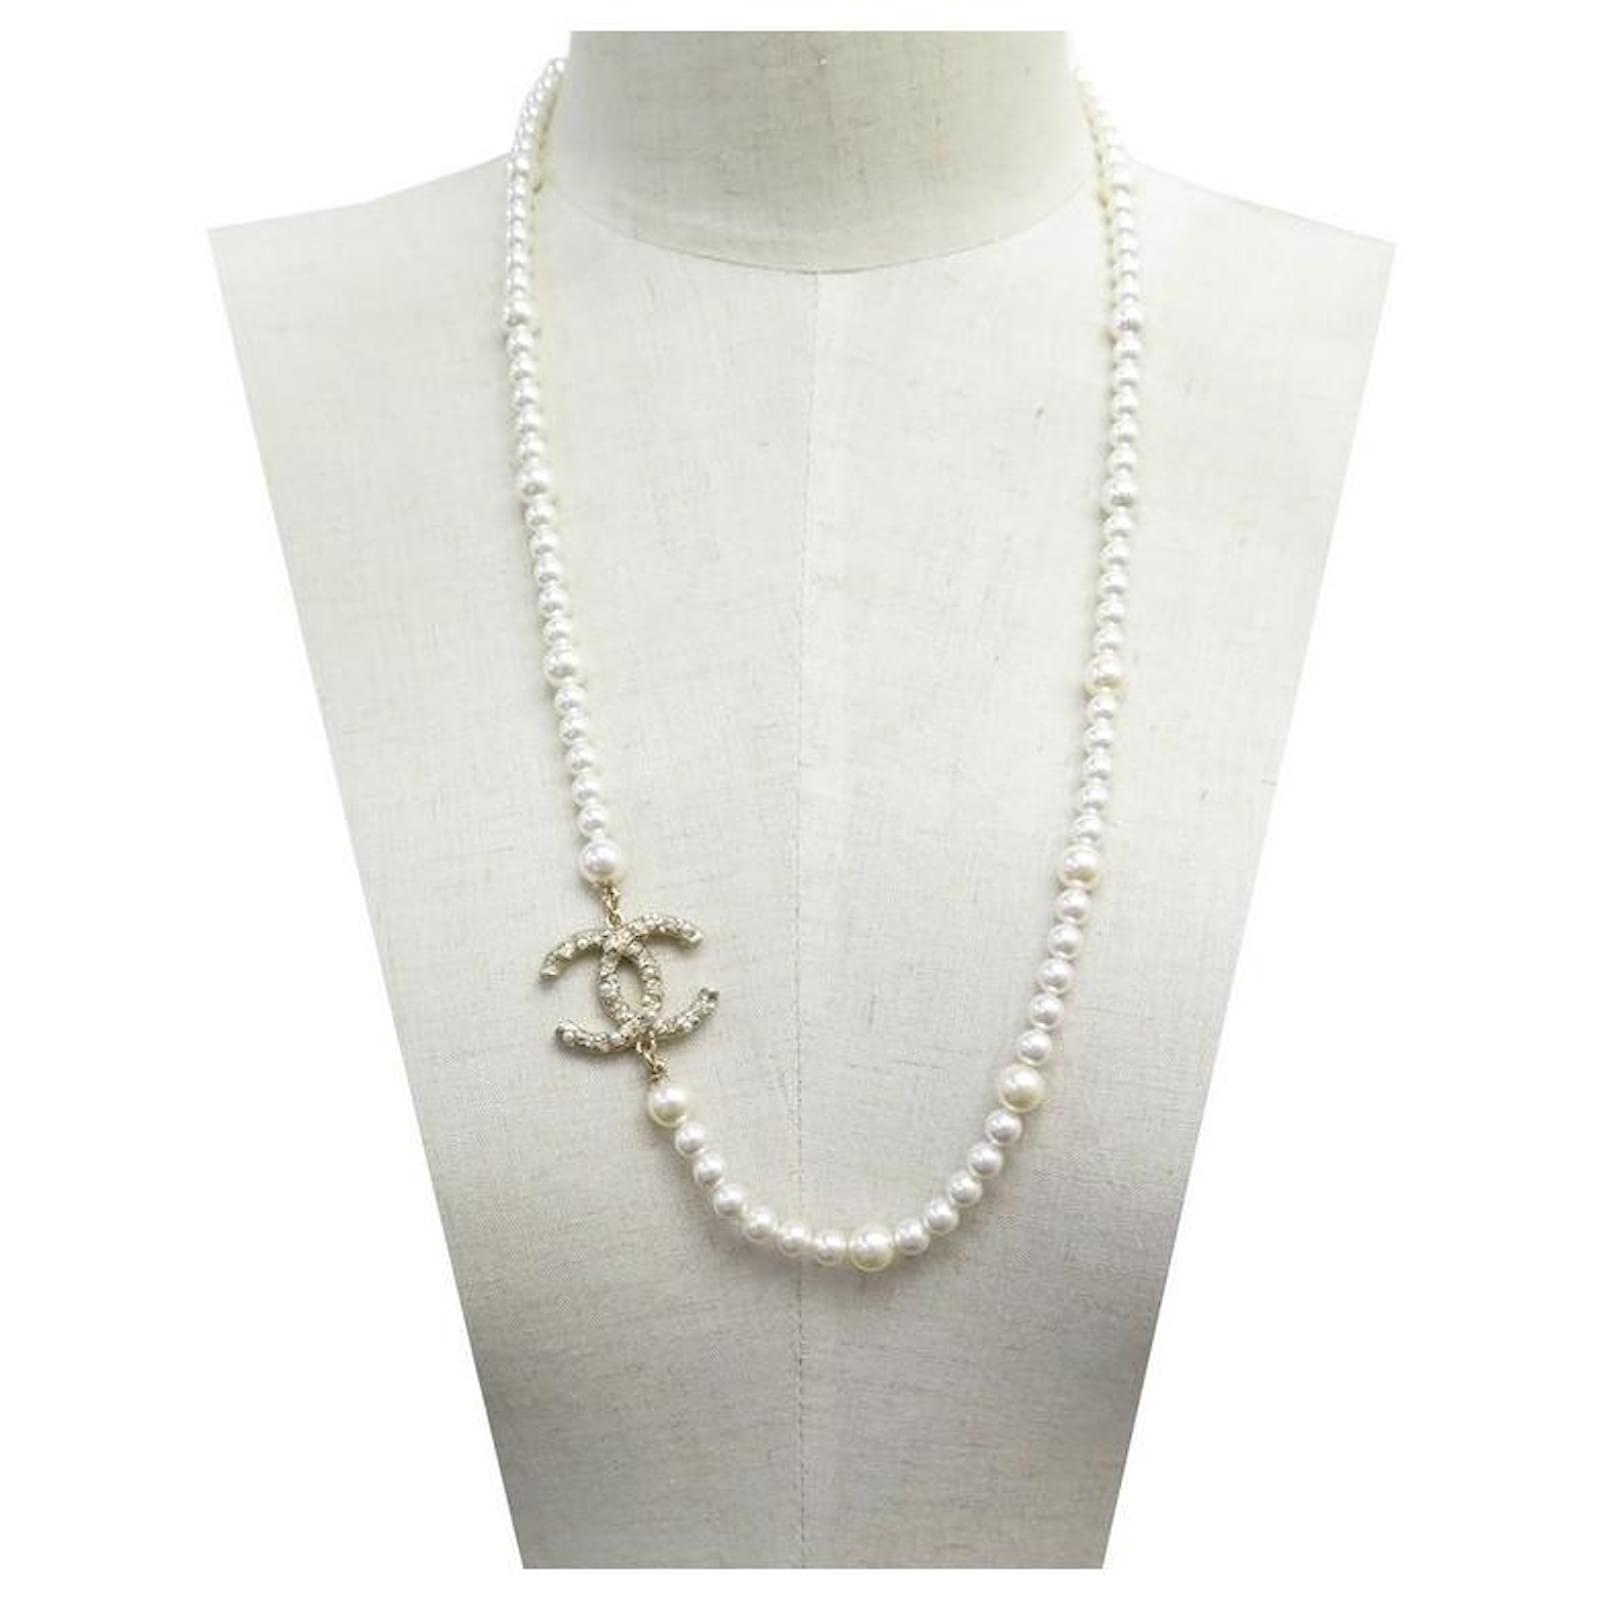 NEW CHANEL NECKLACE LOGO CC & PEARLS NECKLACE 70 CM IN GOLD METAL